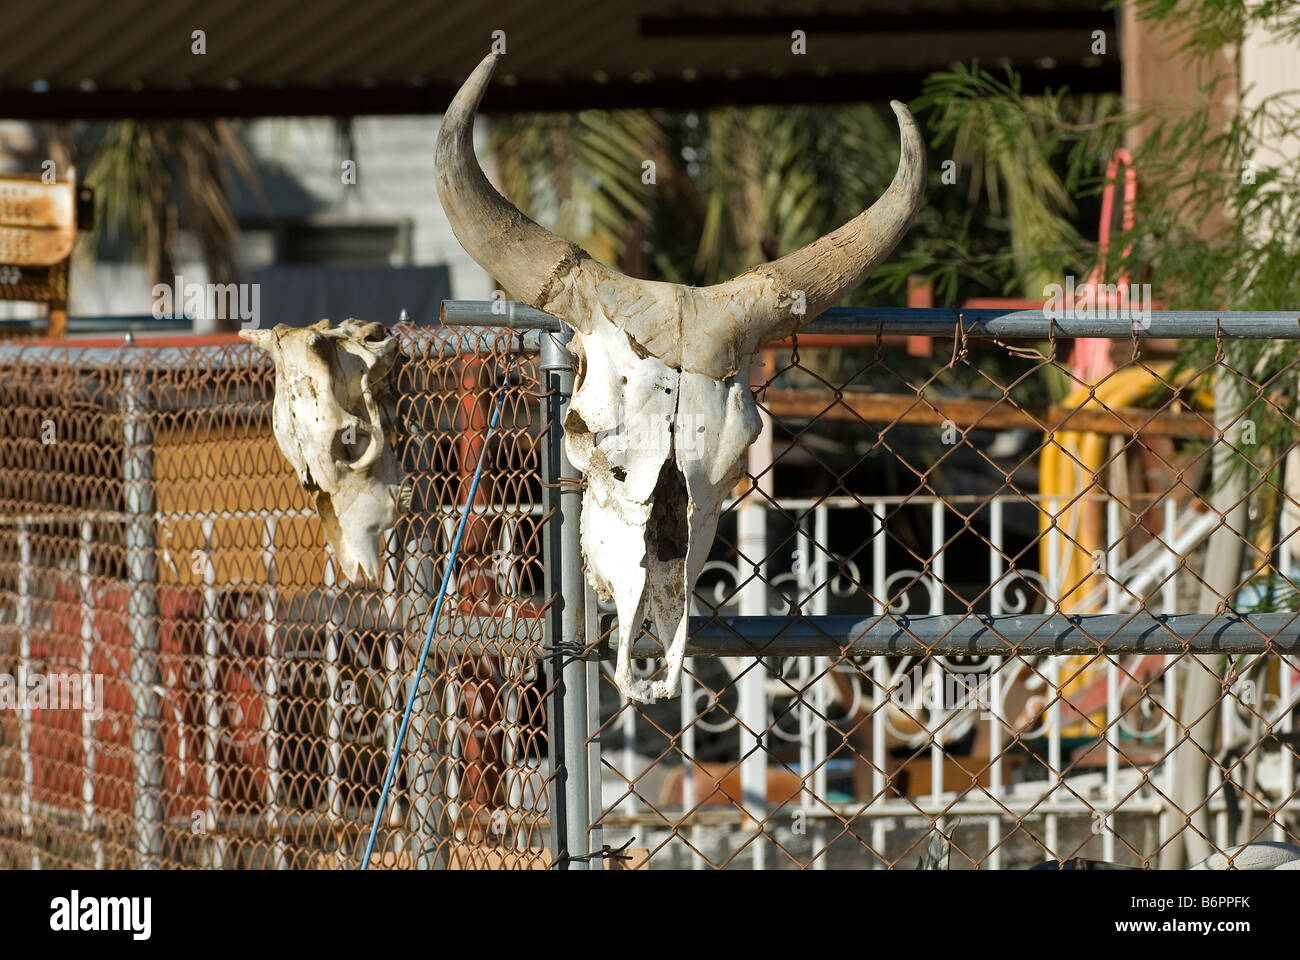 Steer scull with horns hanging on fence, Salton Sea Beach, Souther California, USA. Stock Photo